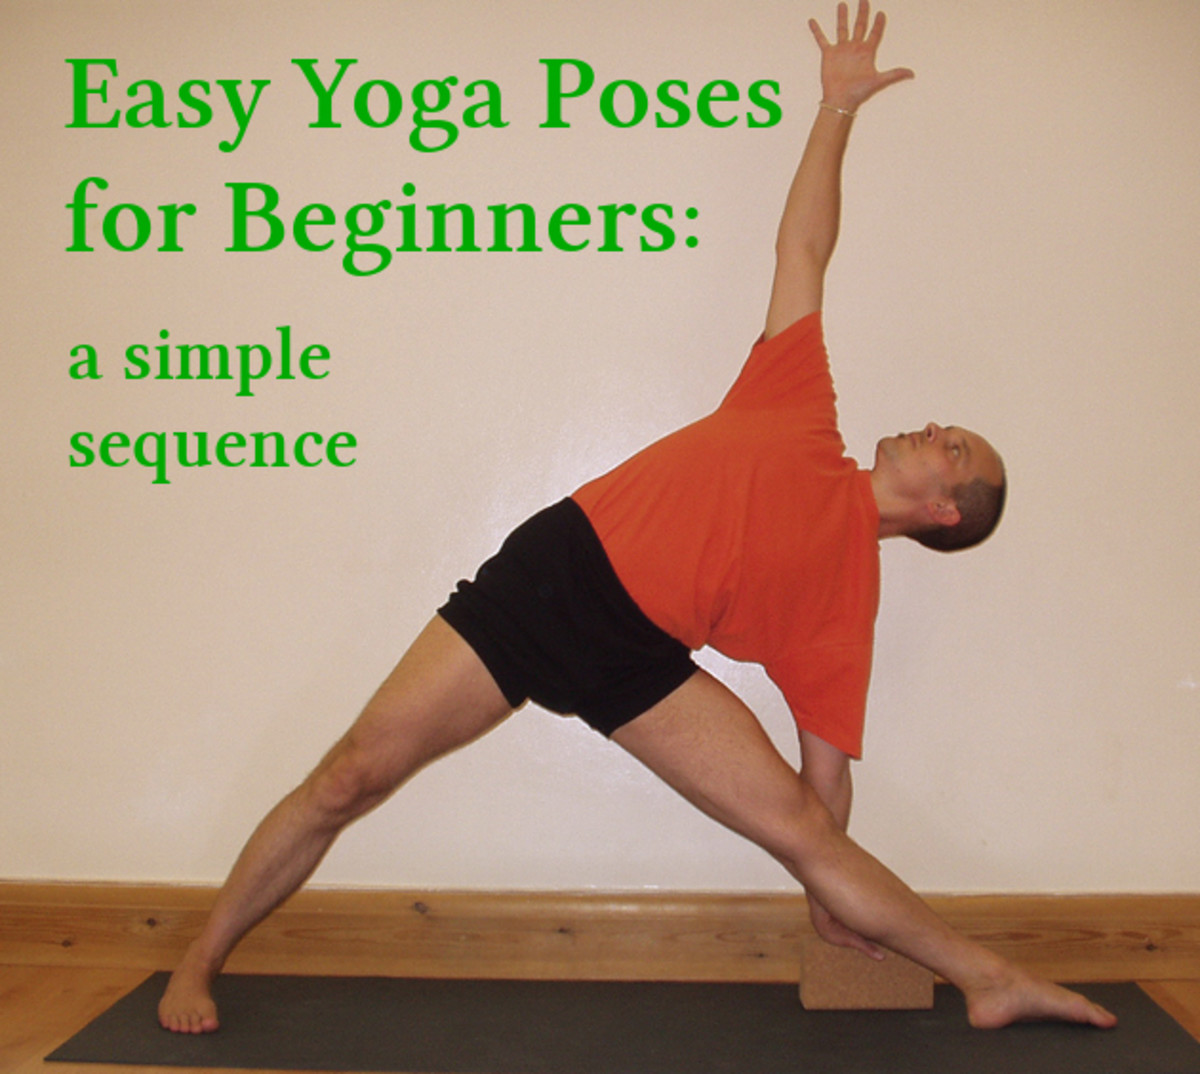 Easy Yoga Poses for Beginners and Home Practice | CalorieBee